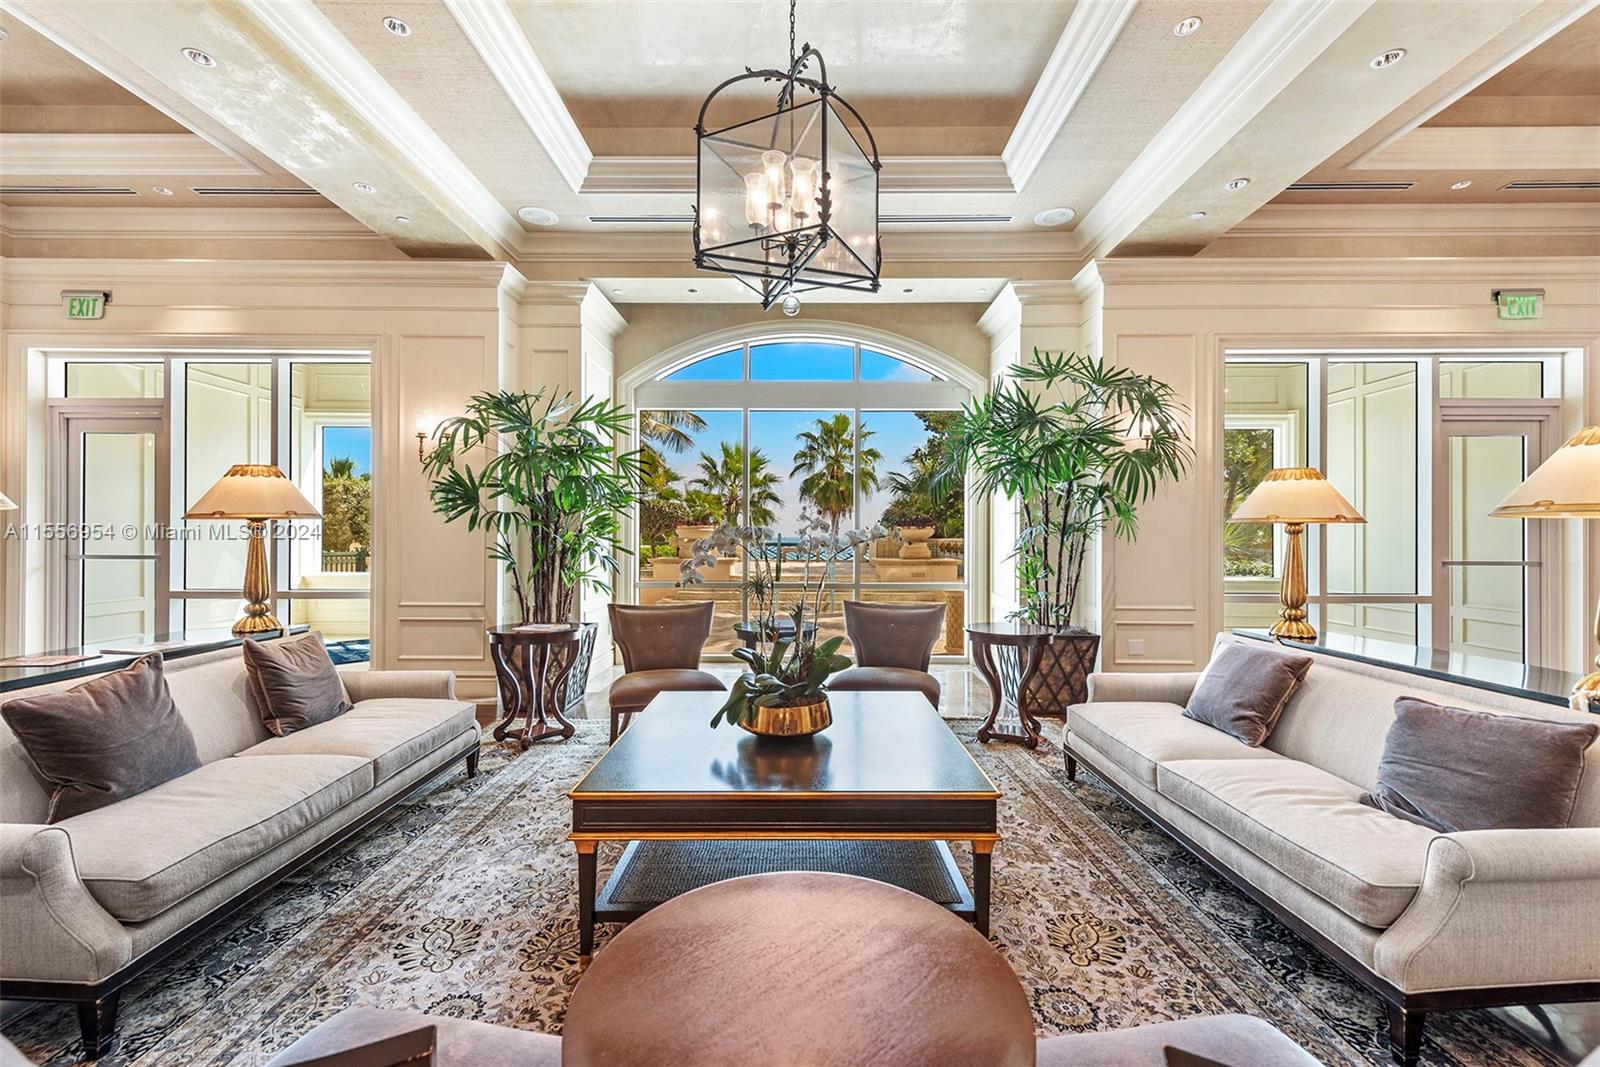 Turnberry Ocean Colony image #43